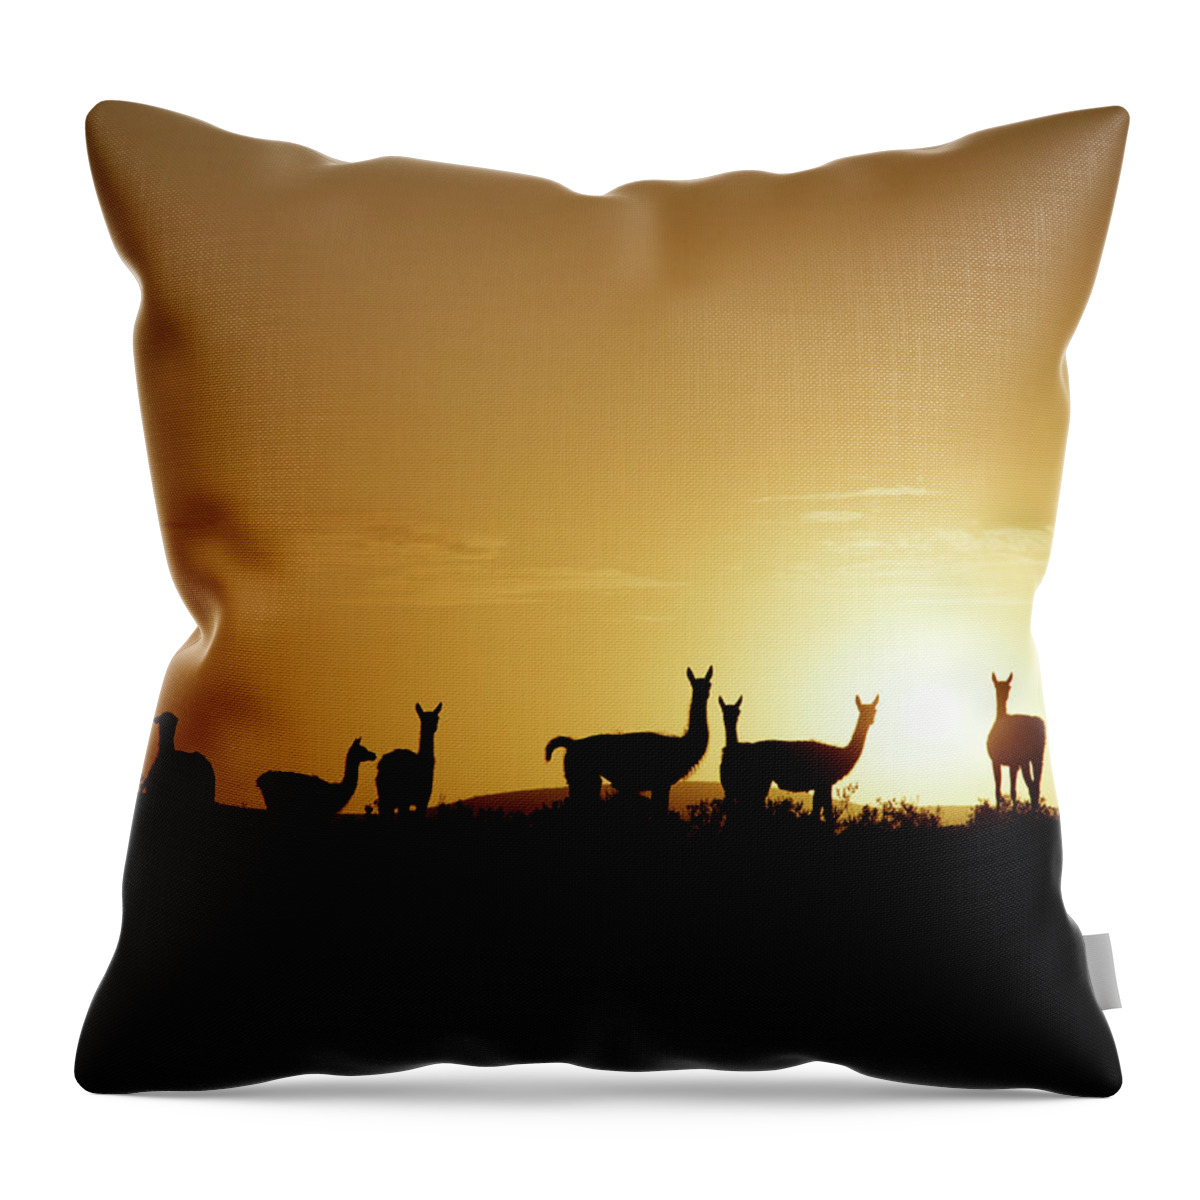 South America Throw Pillow featuring the photograph Herd Of Of Guanacos In Silhouette At by Manfred Gottschalk